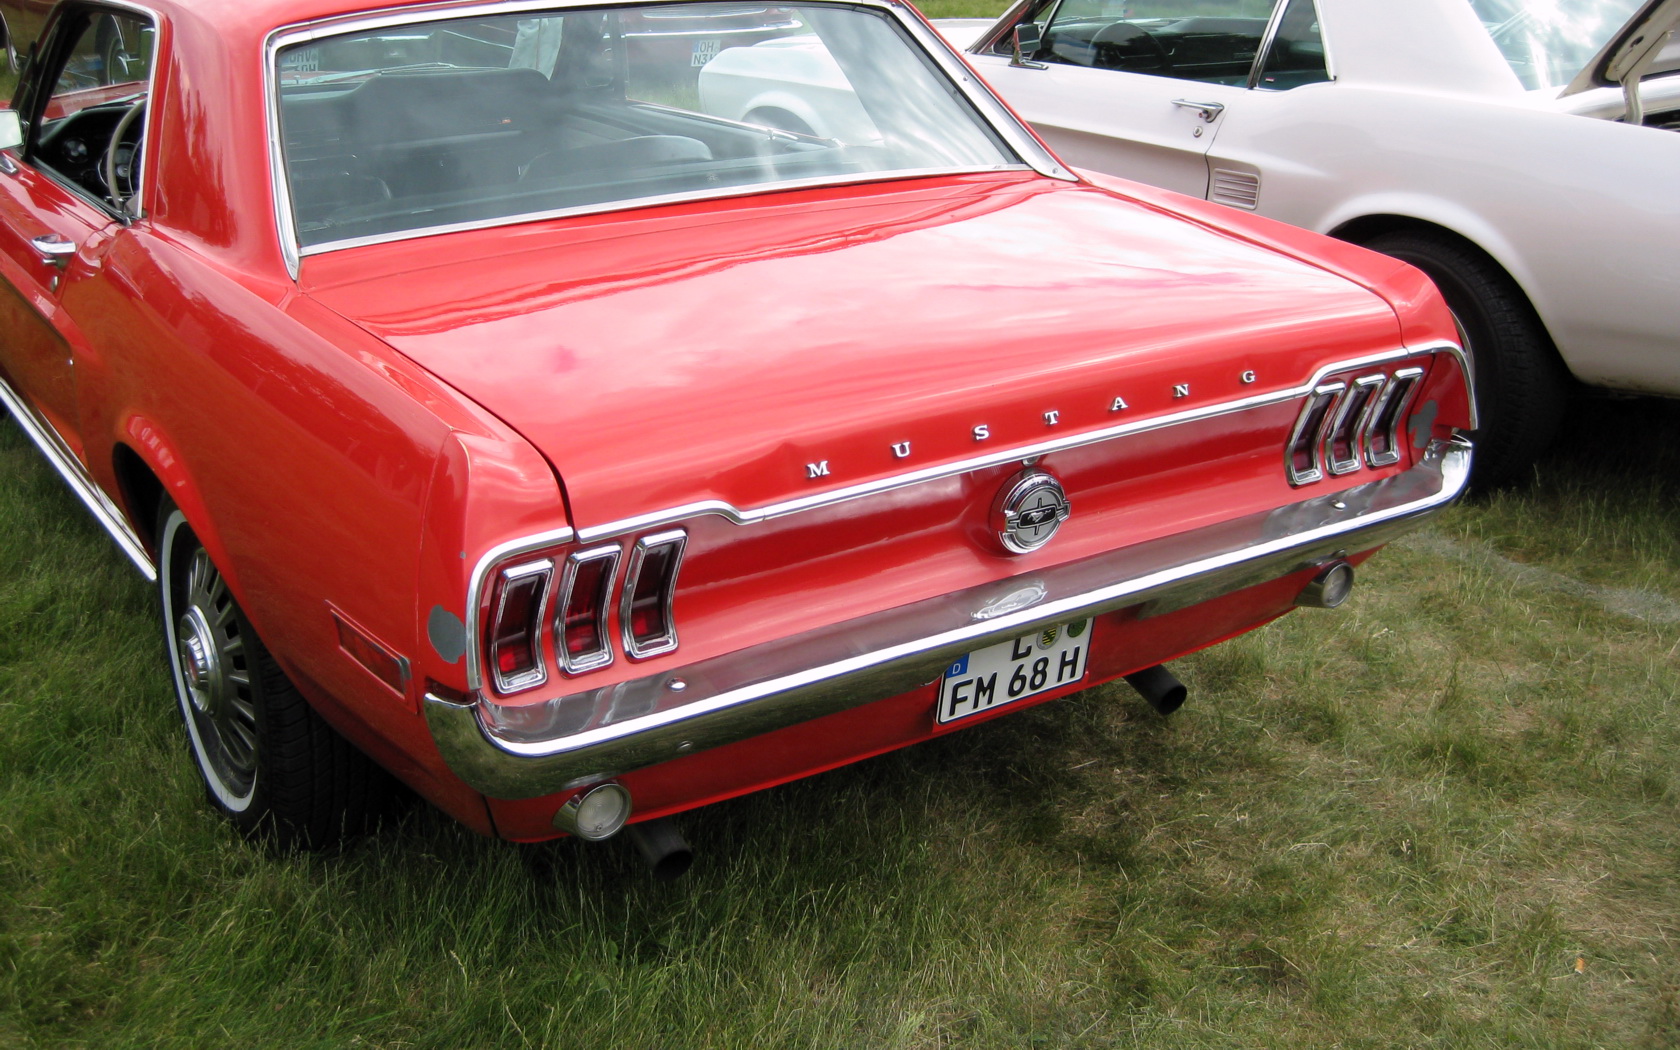 this red ford mustang coupe has the company's initials on the hood